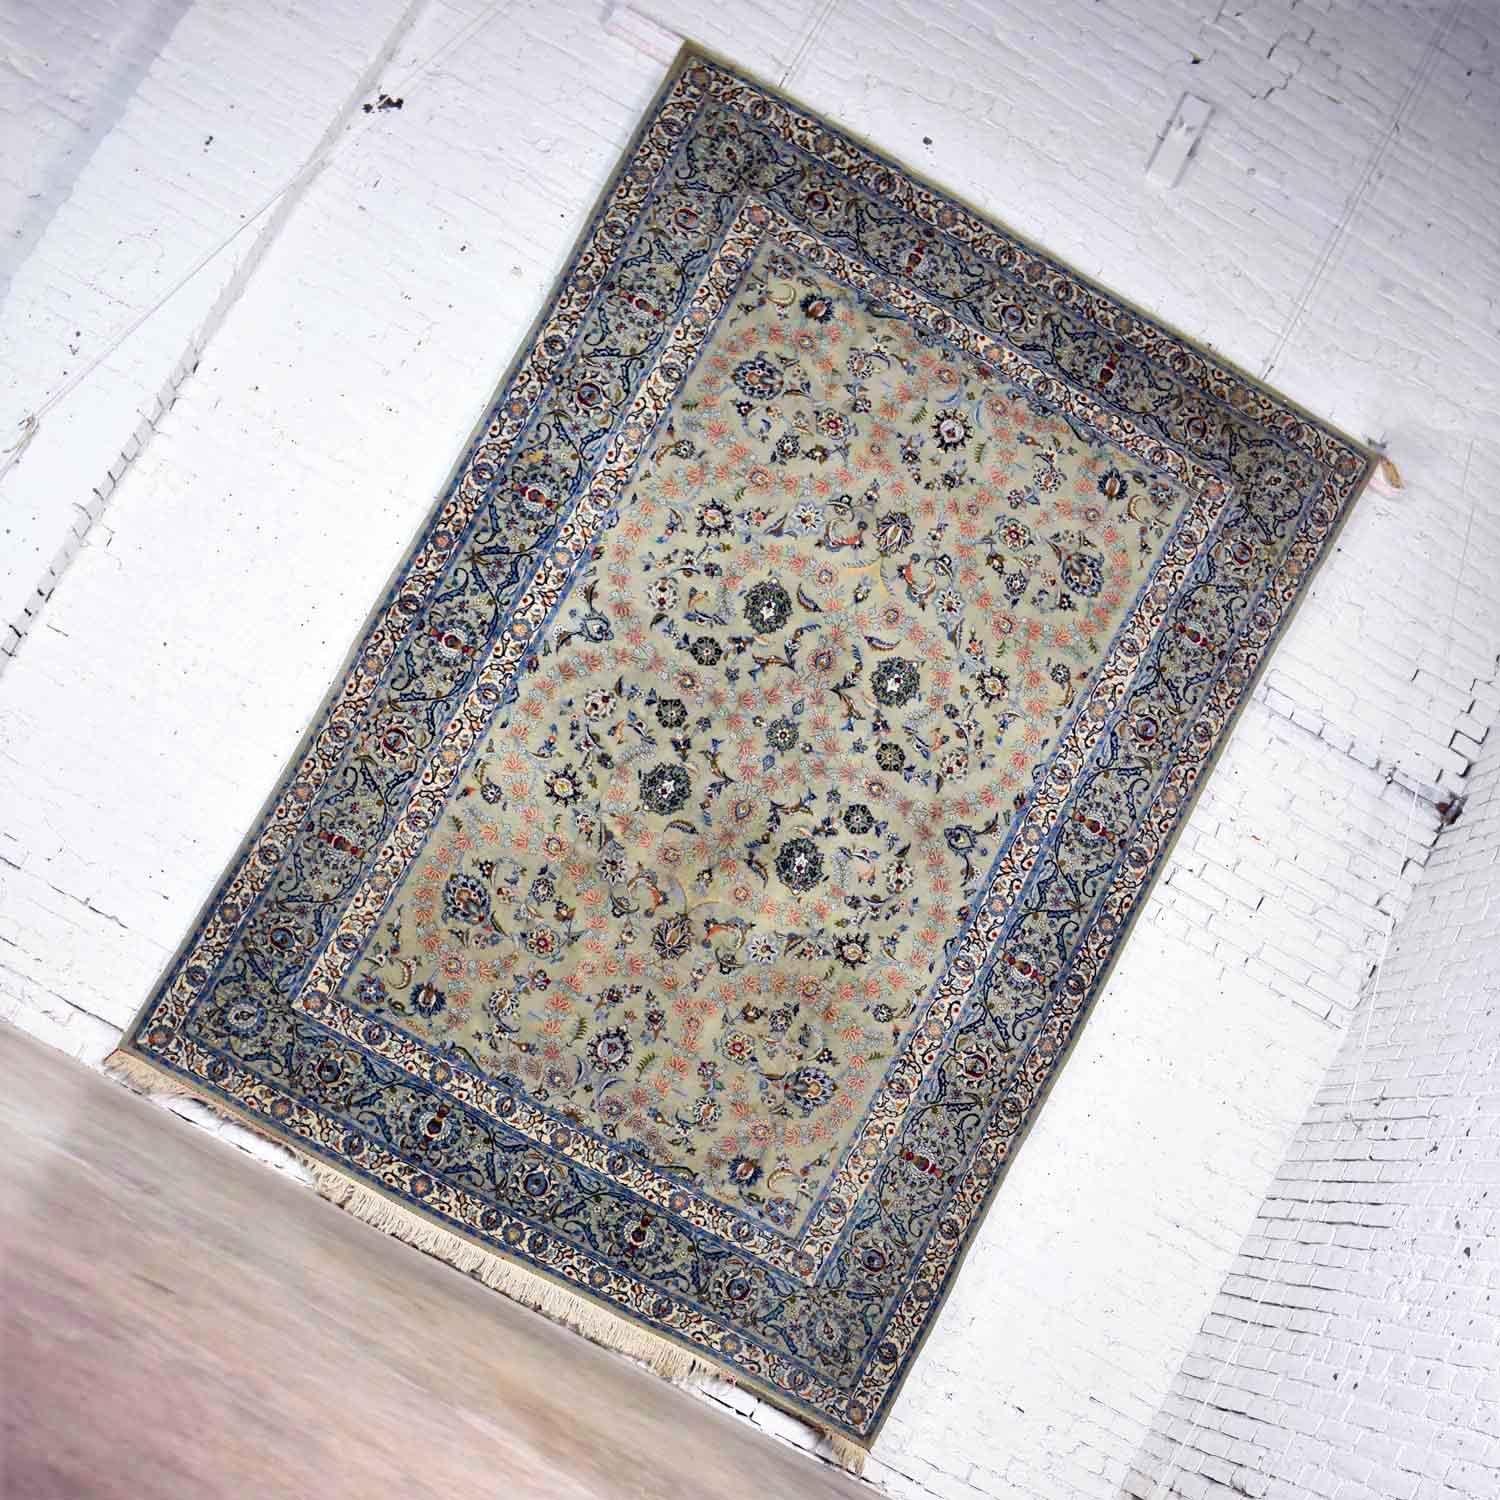 Handmade Persian Wool Tabriz Style Large Rug Light Teal Green Ground In Good Condition For Sale In Topeka, KS